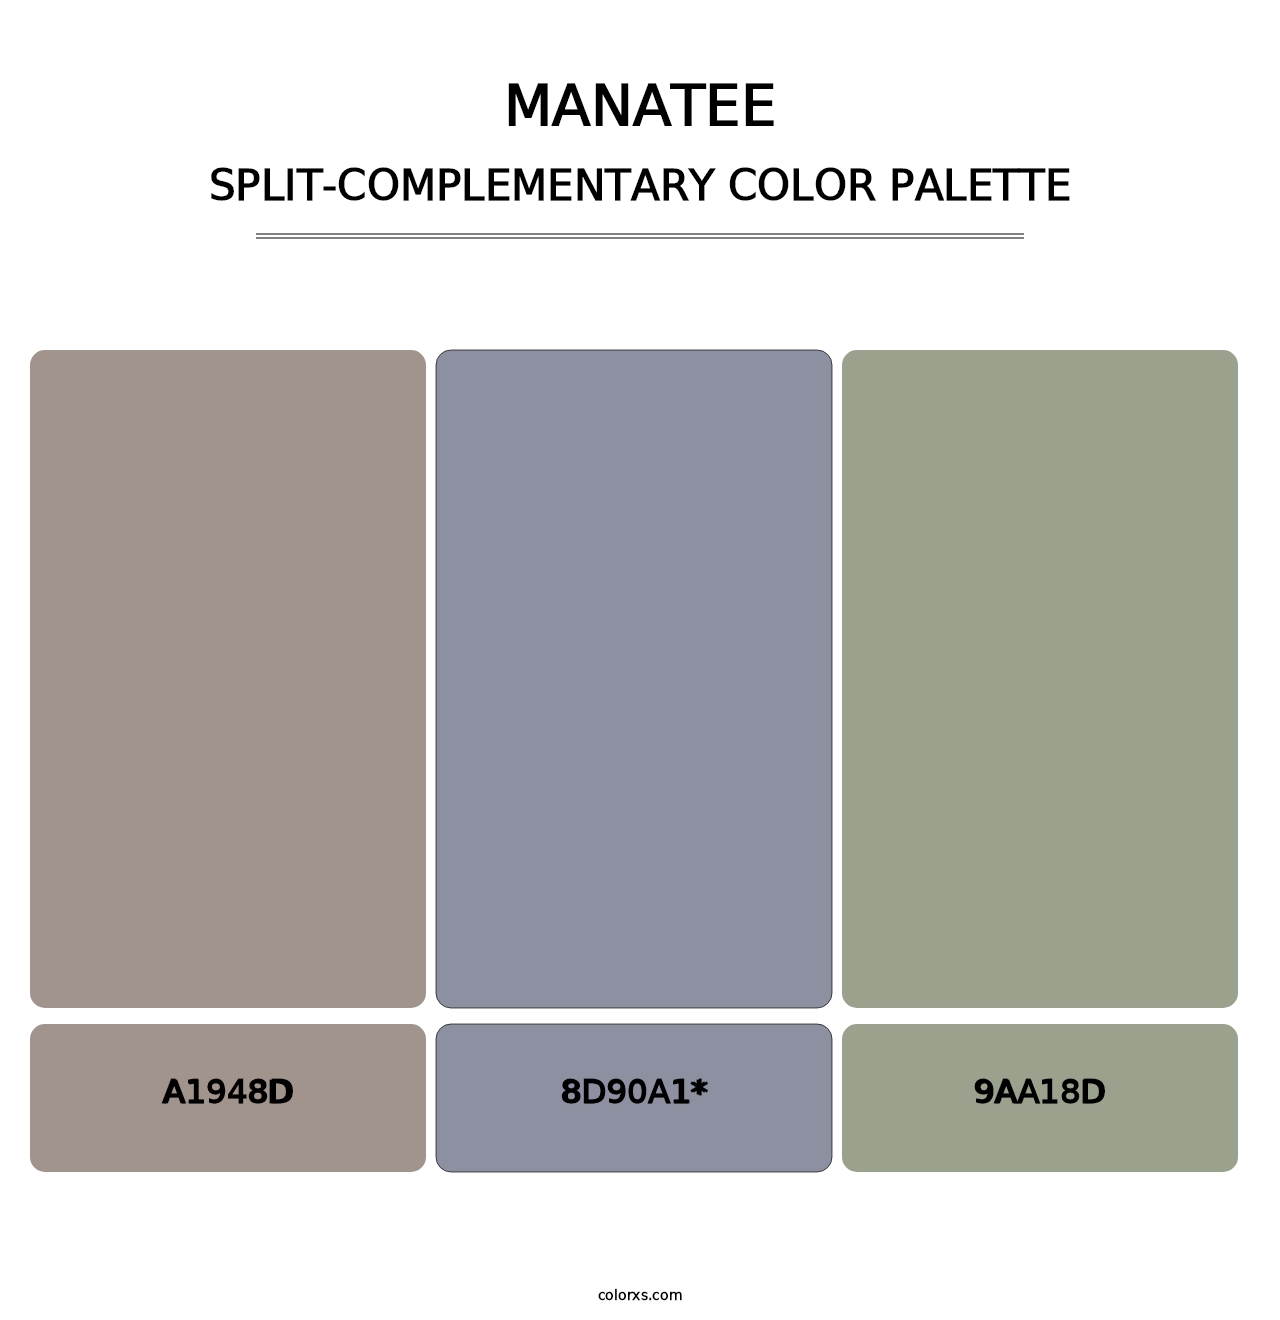 Manatee - Split-Complementary Color Palette